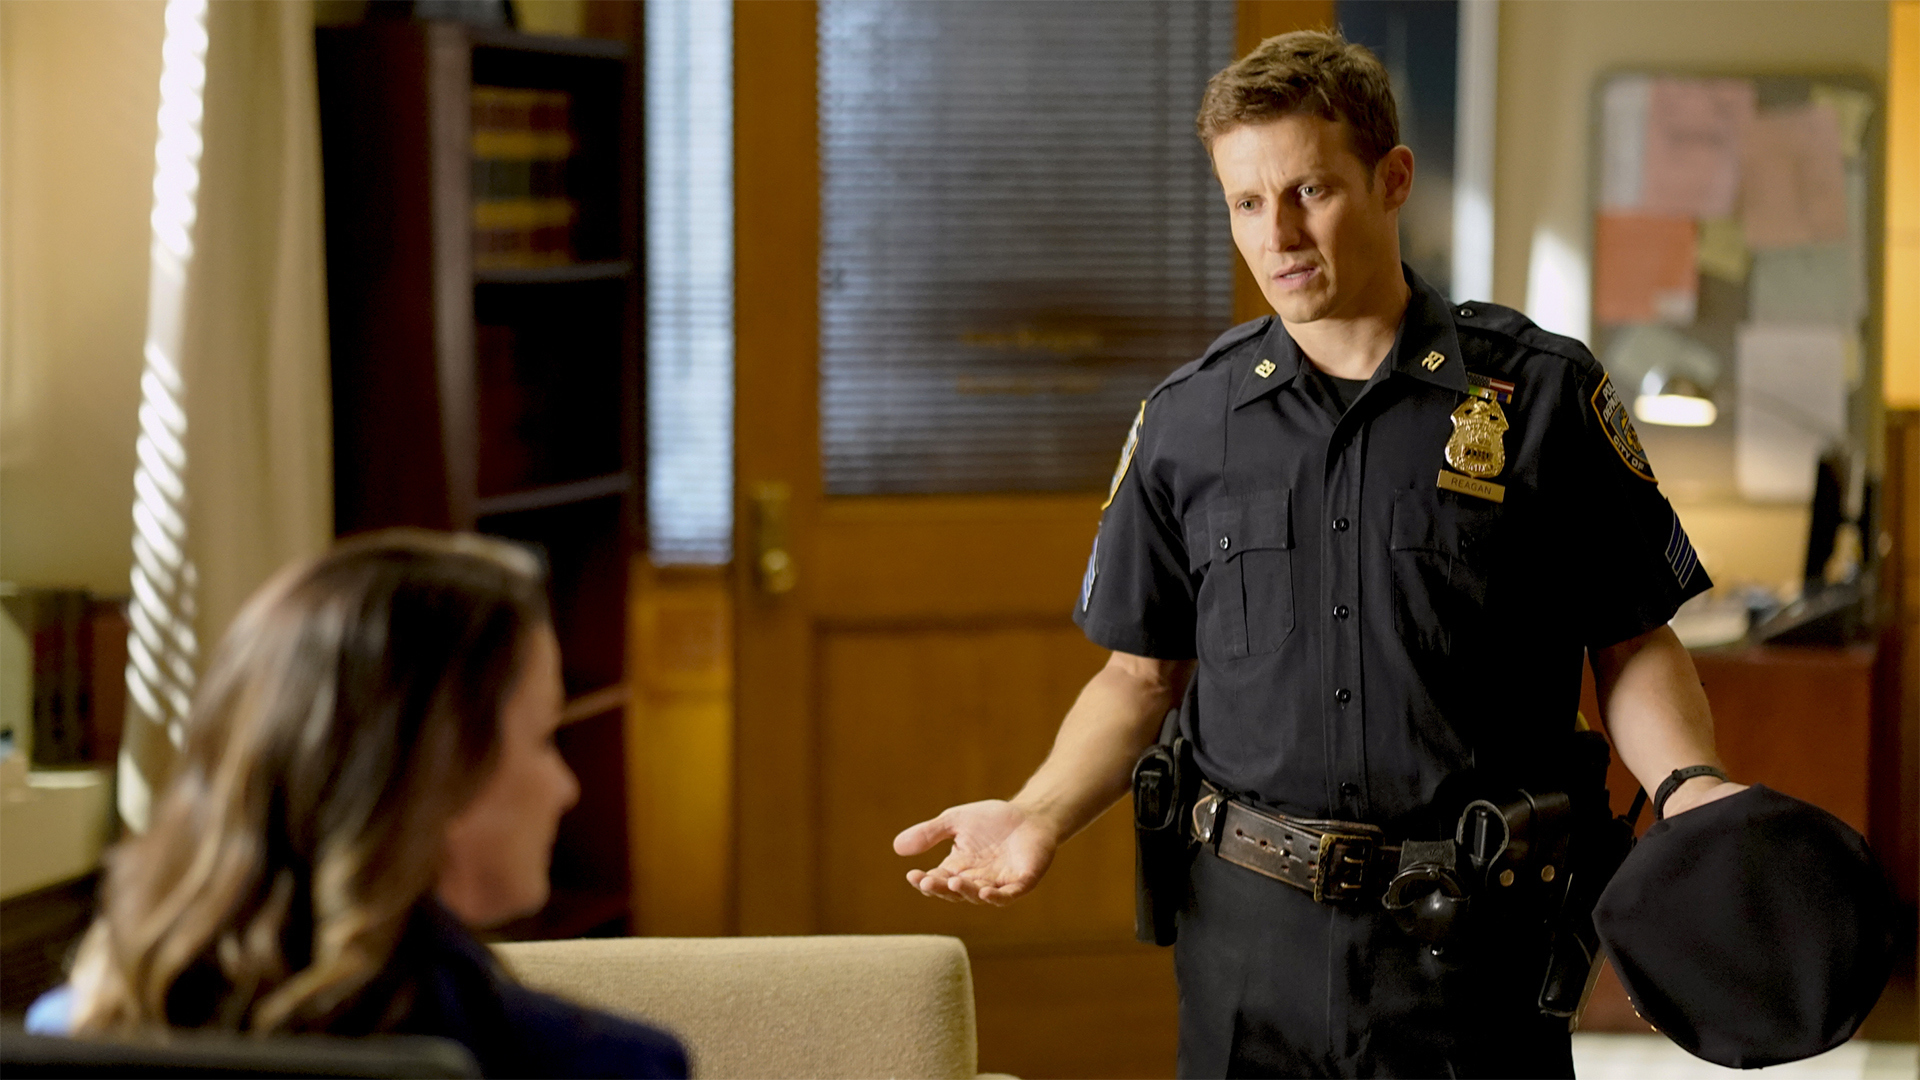 Watch Blue Bloods Season 10 Episode 3 Behind the Smile Full show on CBS